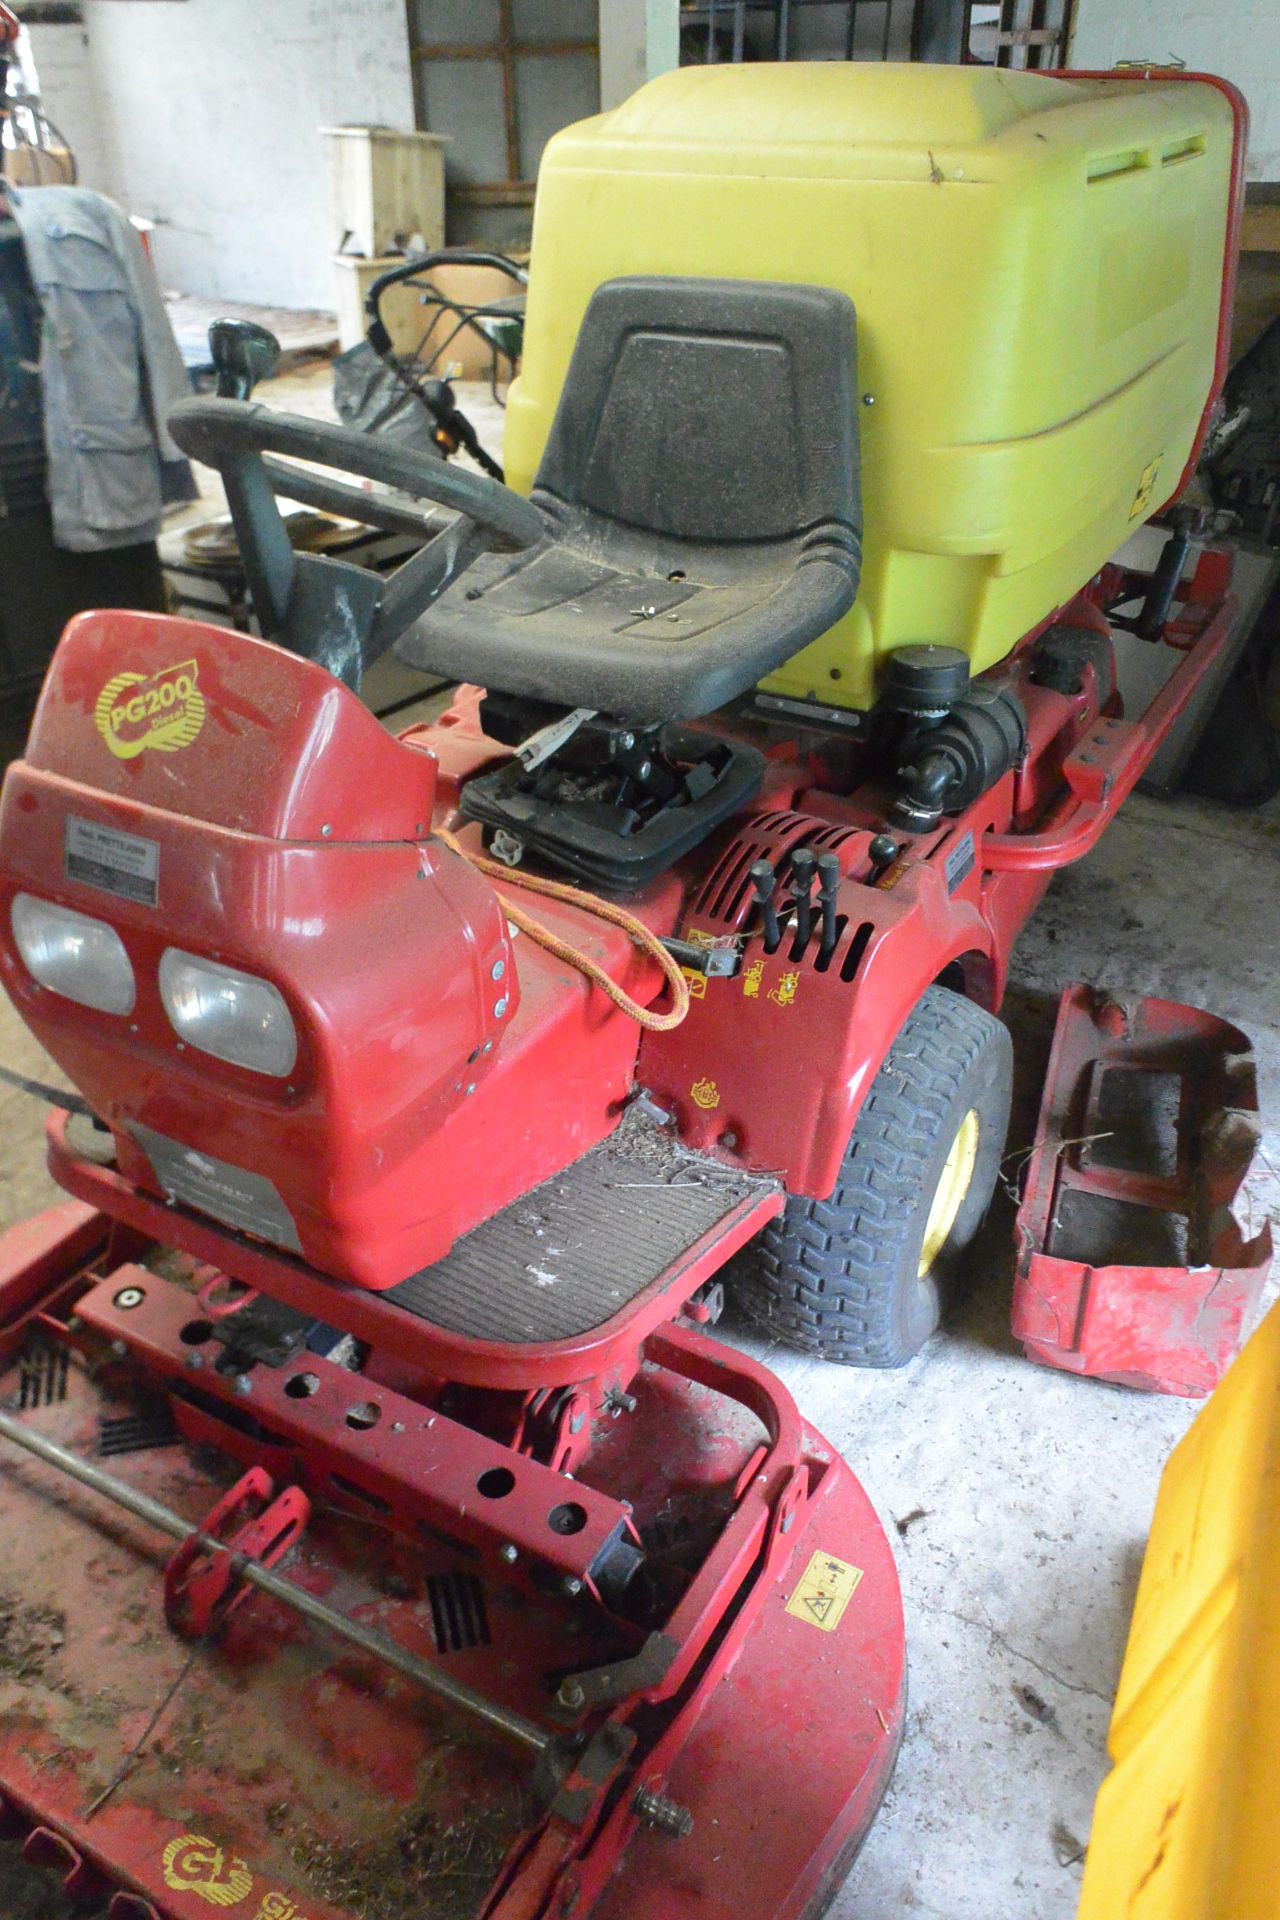 Gianni Ferrari PG200D 4R cut and collect ride on mower, (2007) - Image 6 of 7